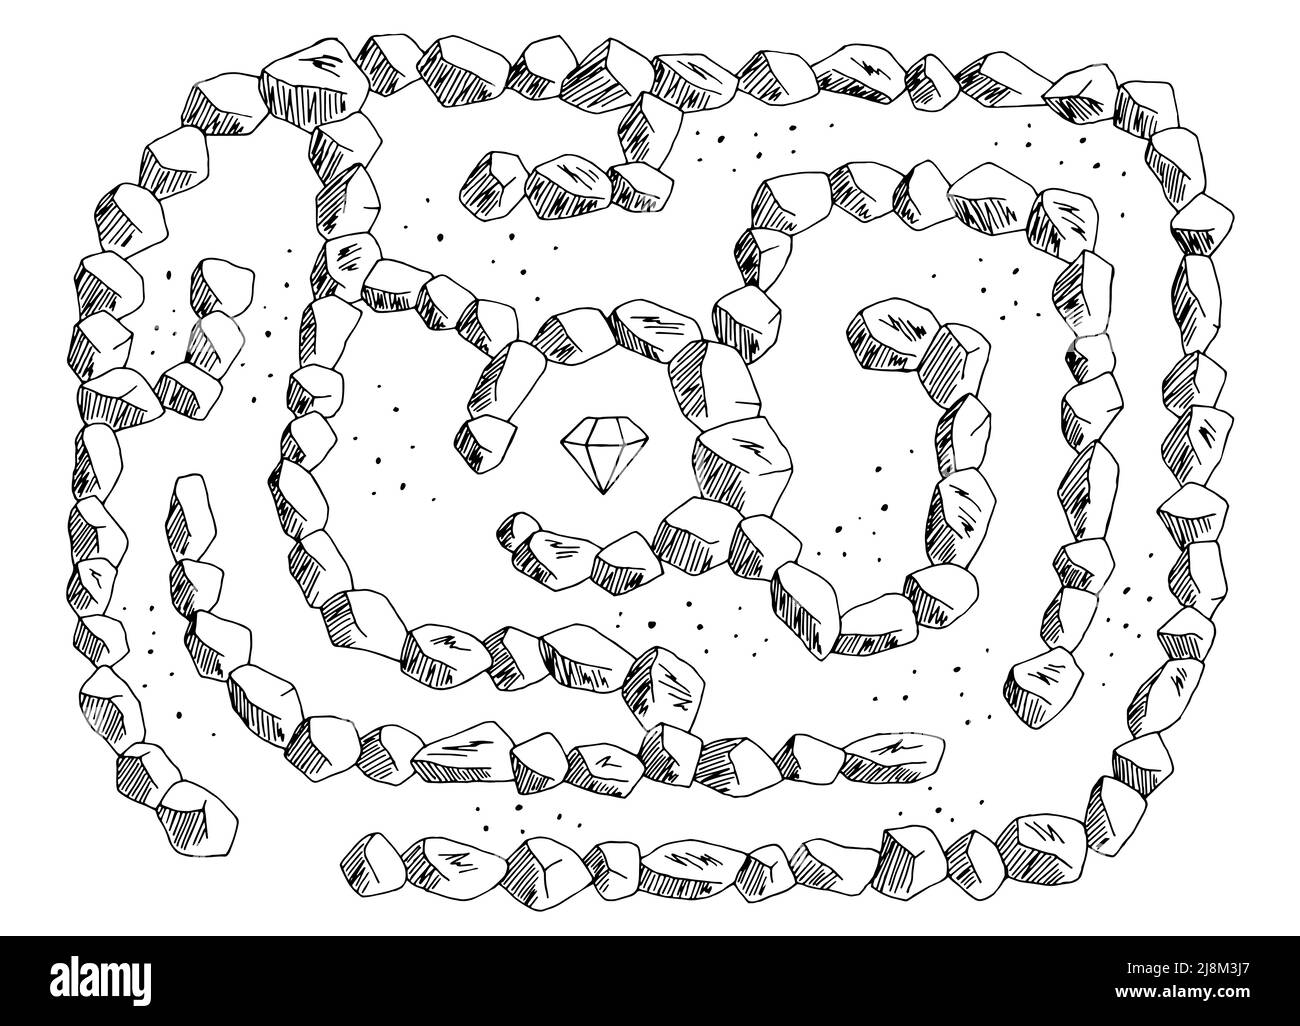 Stone maze graphic black white sketch top aerial view illustration vector Stock Vector